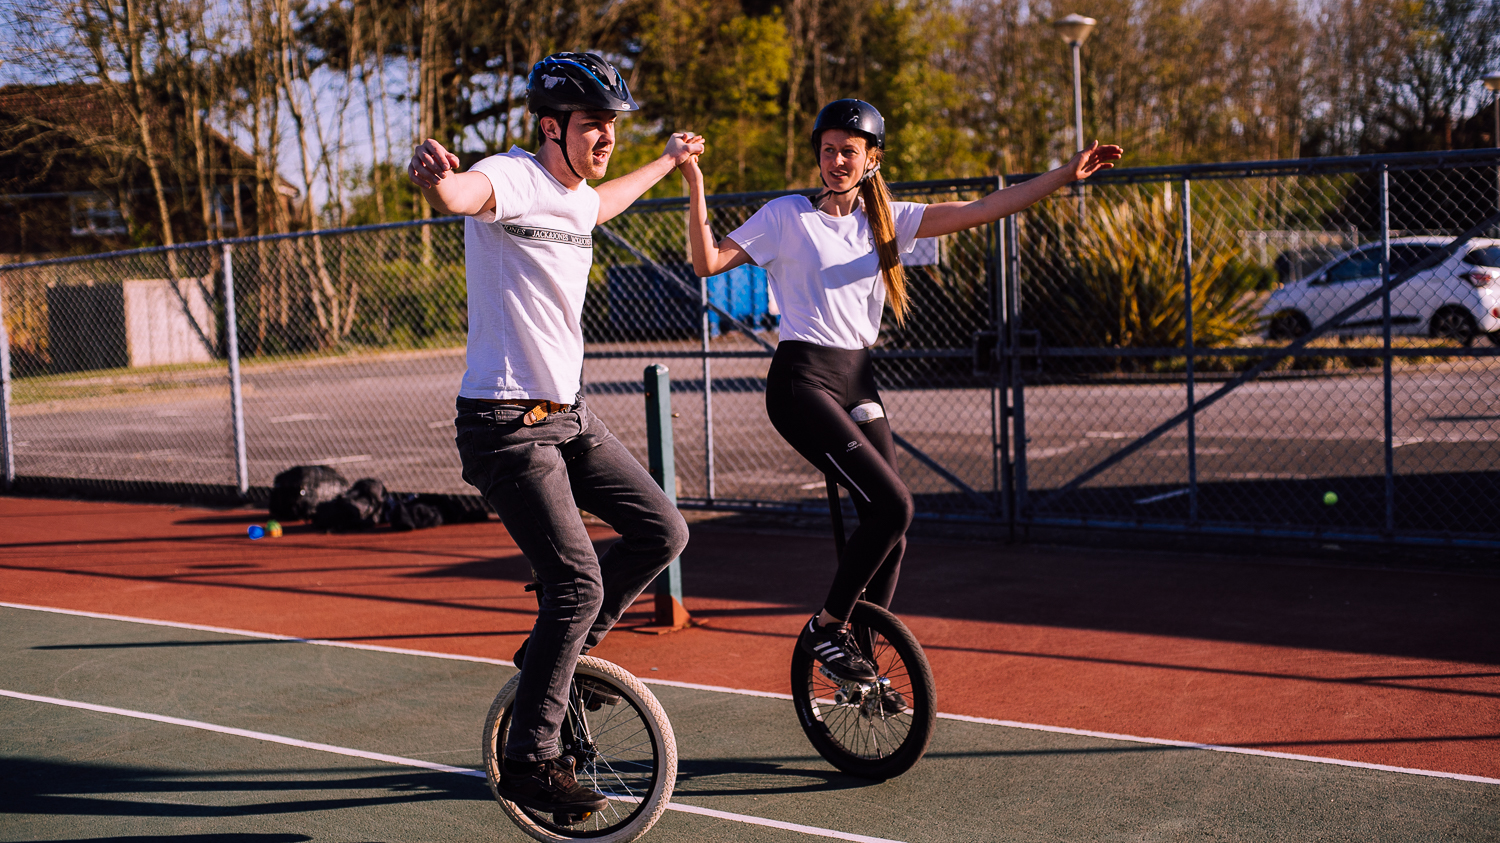 Unicycling Skills 1: Learn to ride